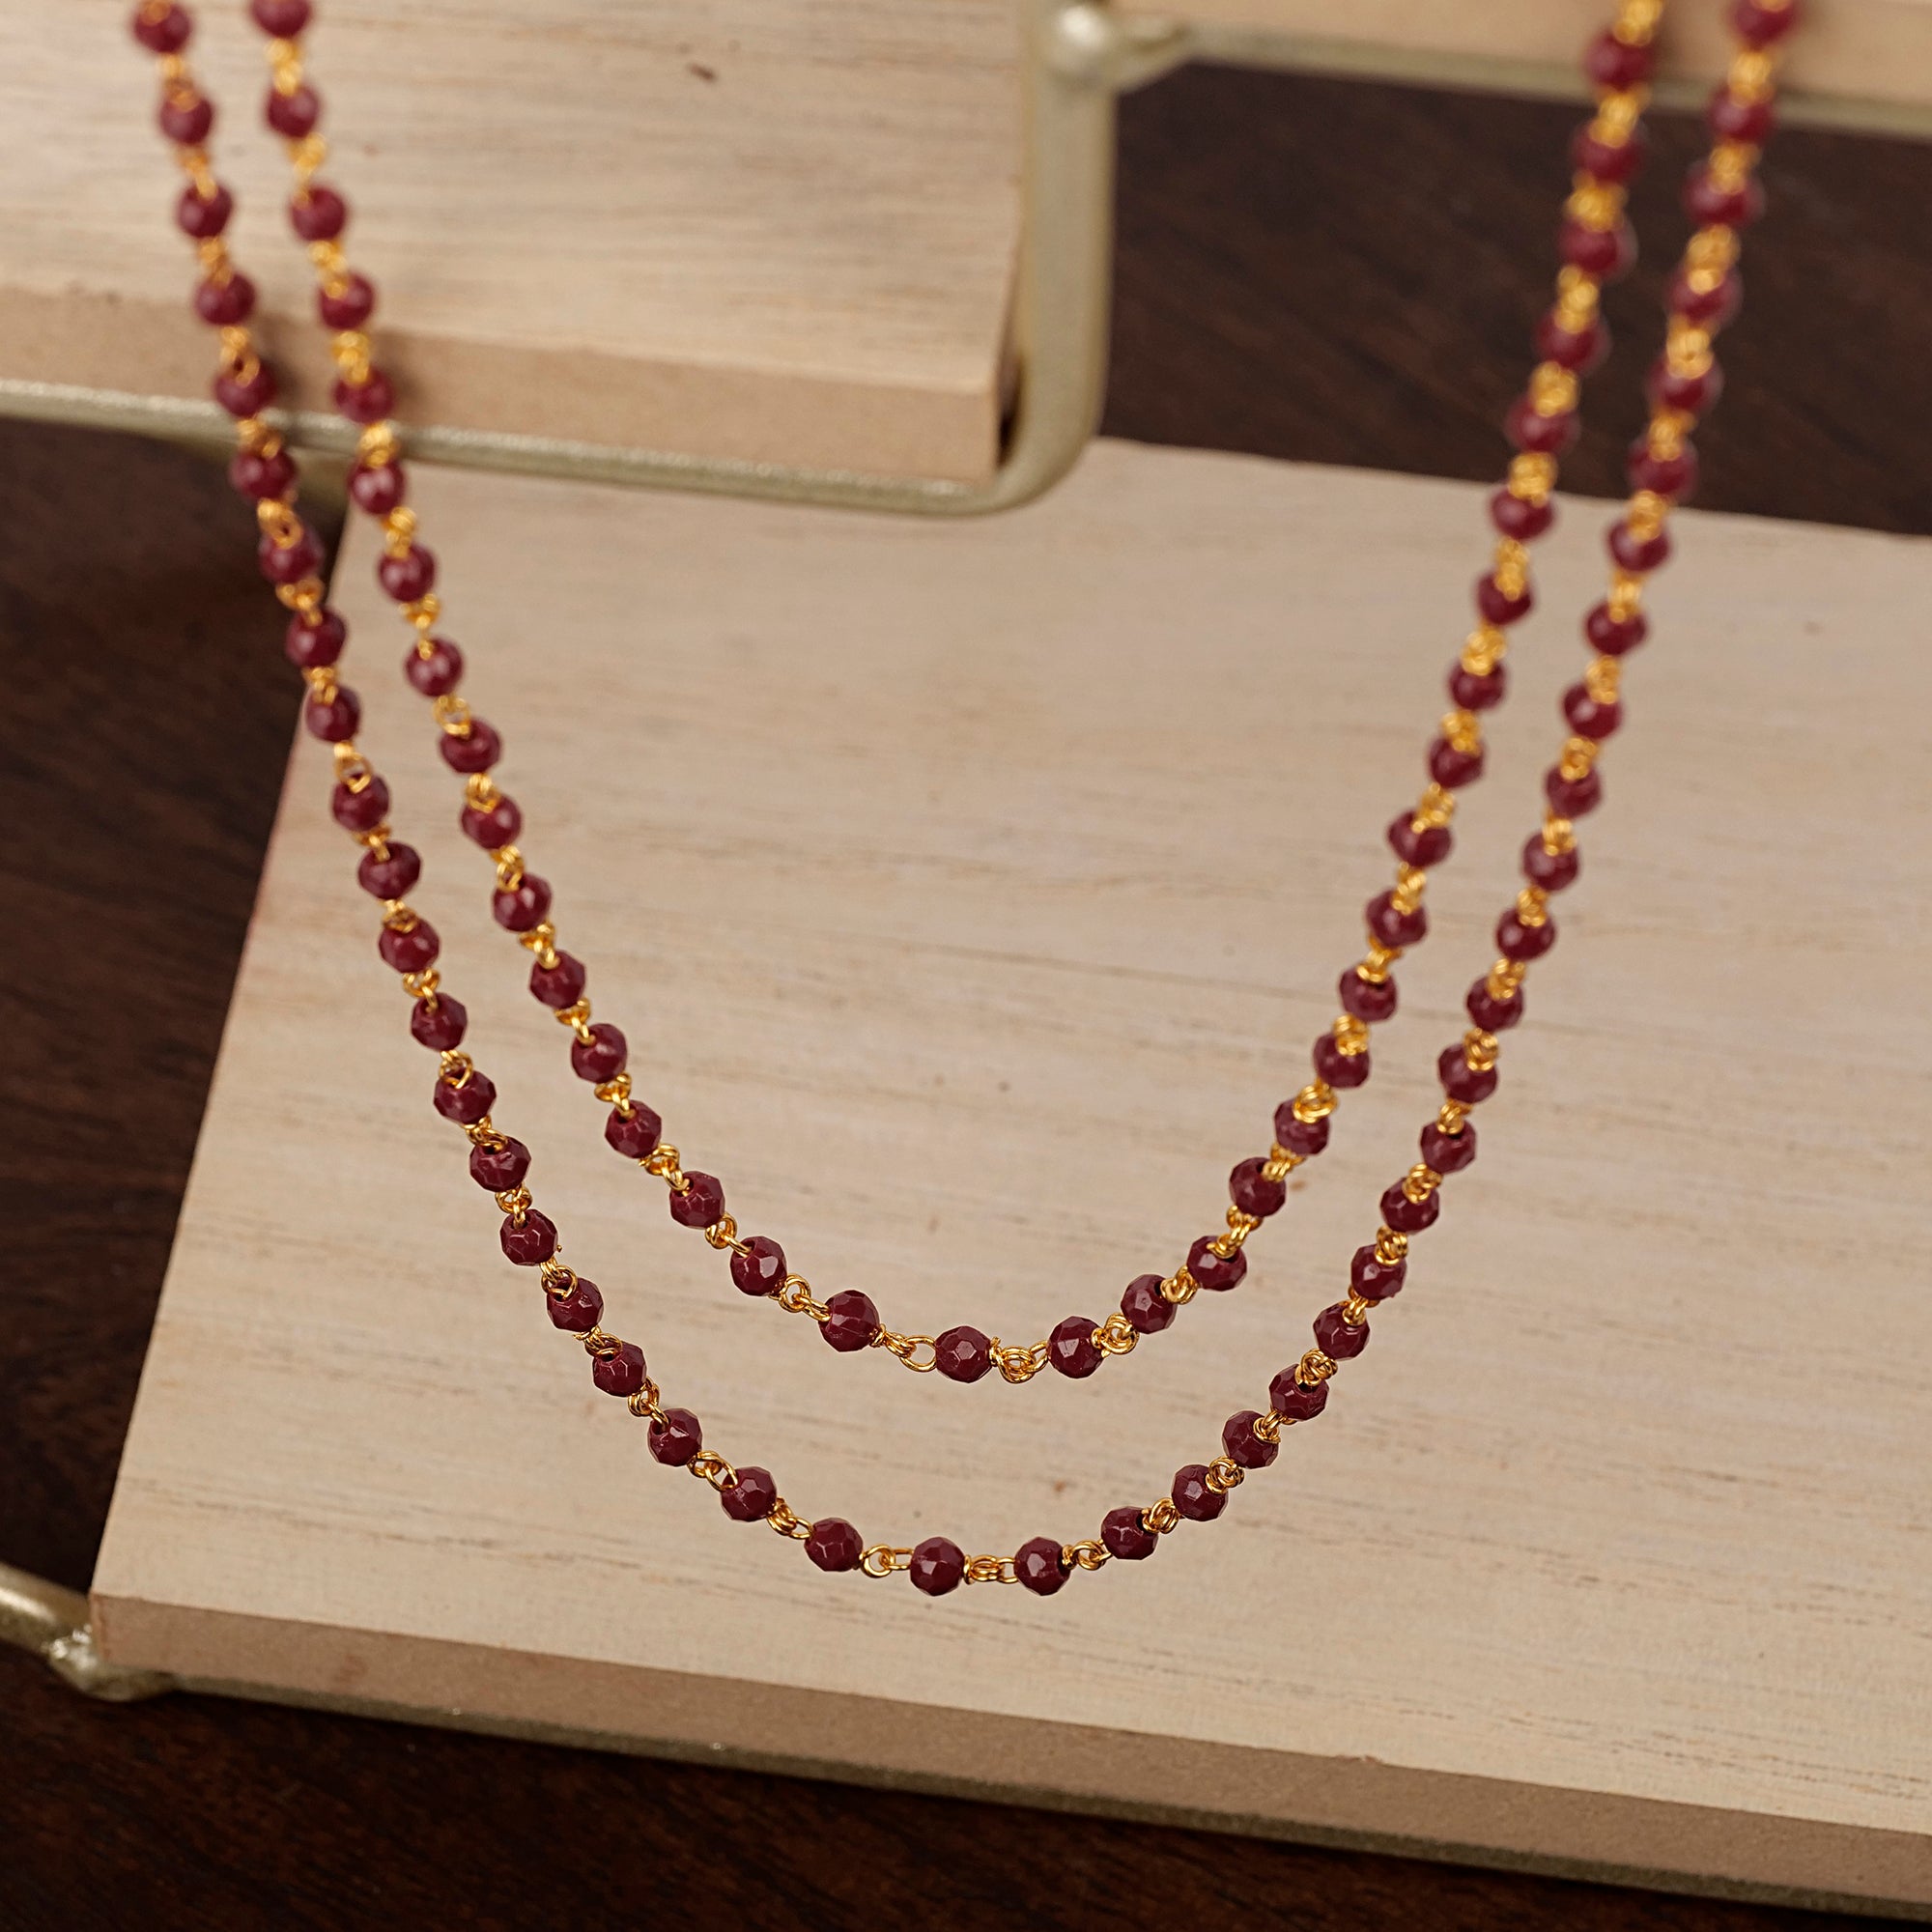 Maria Layered Bead Necklace in Maroon